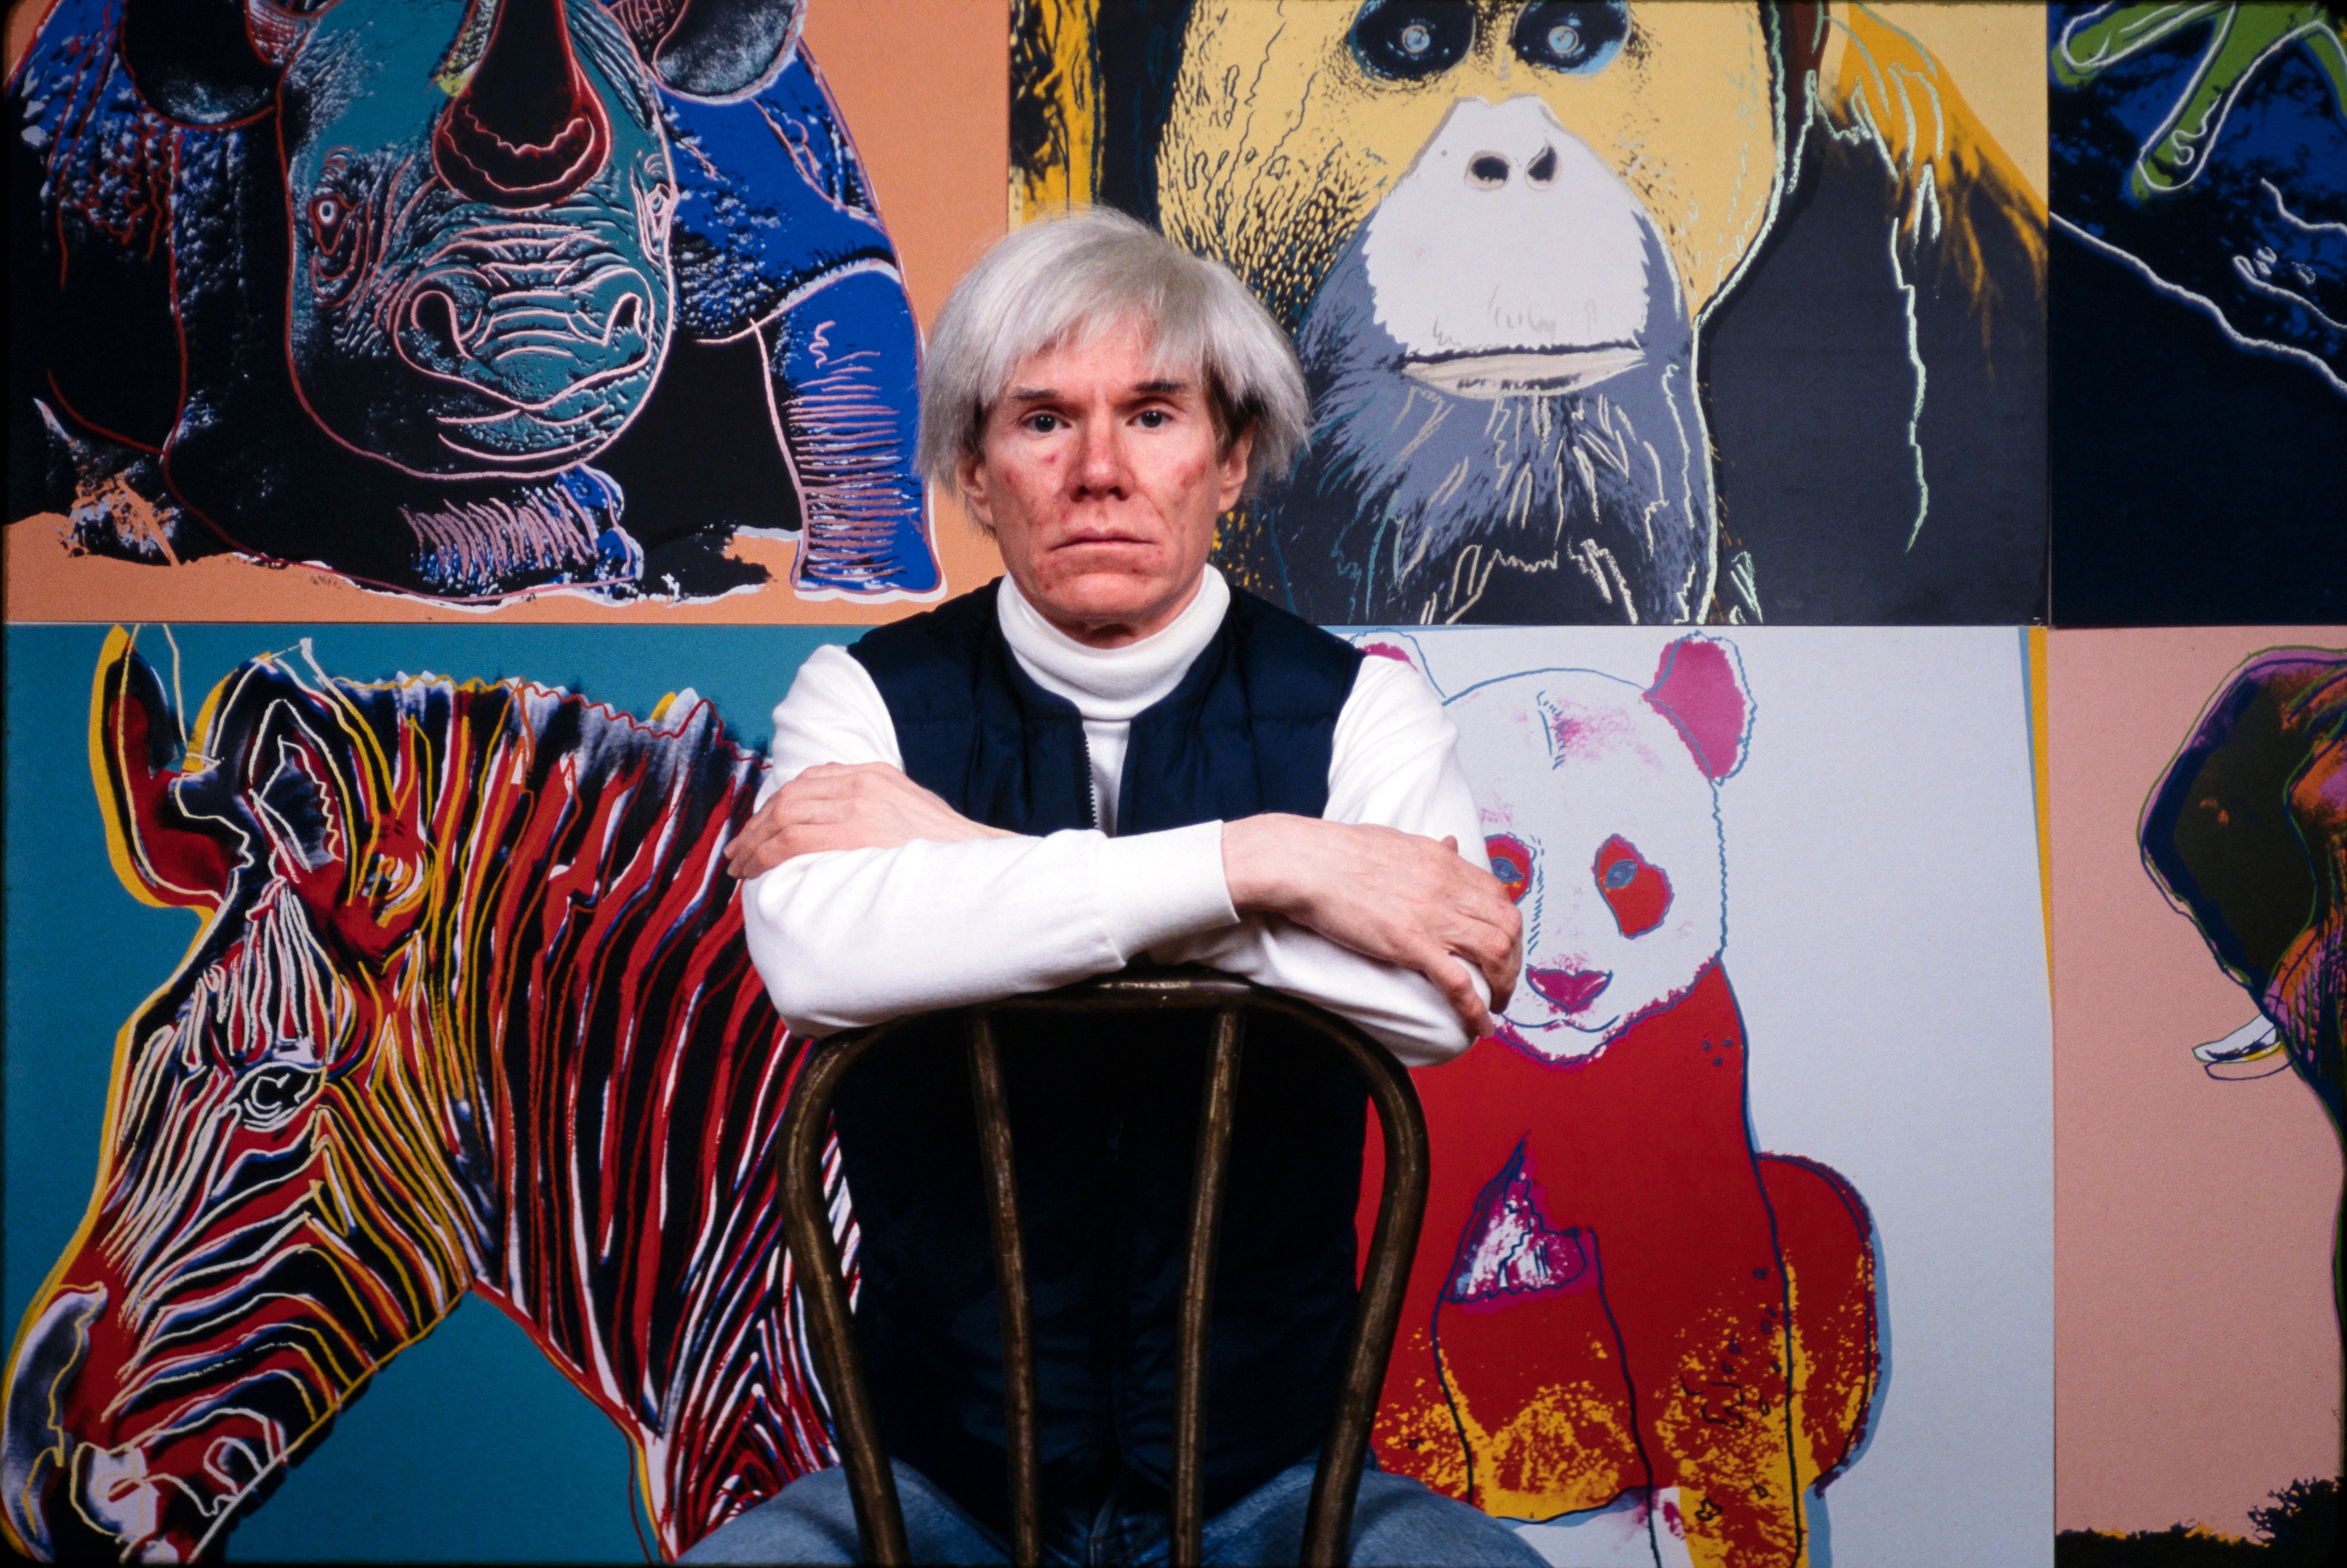 Warhol’s art is a ‘pure reflection of popular culture in his lifetime and the spirit of western capitalism’, says creative director Kate Brown